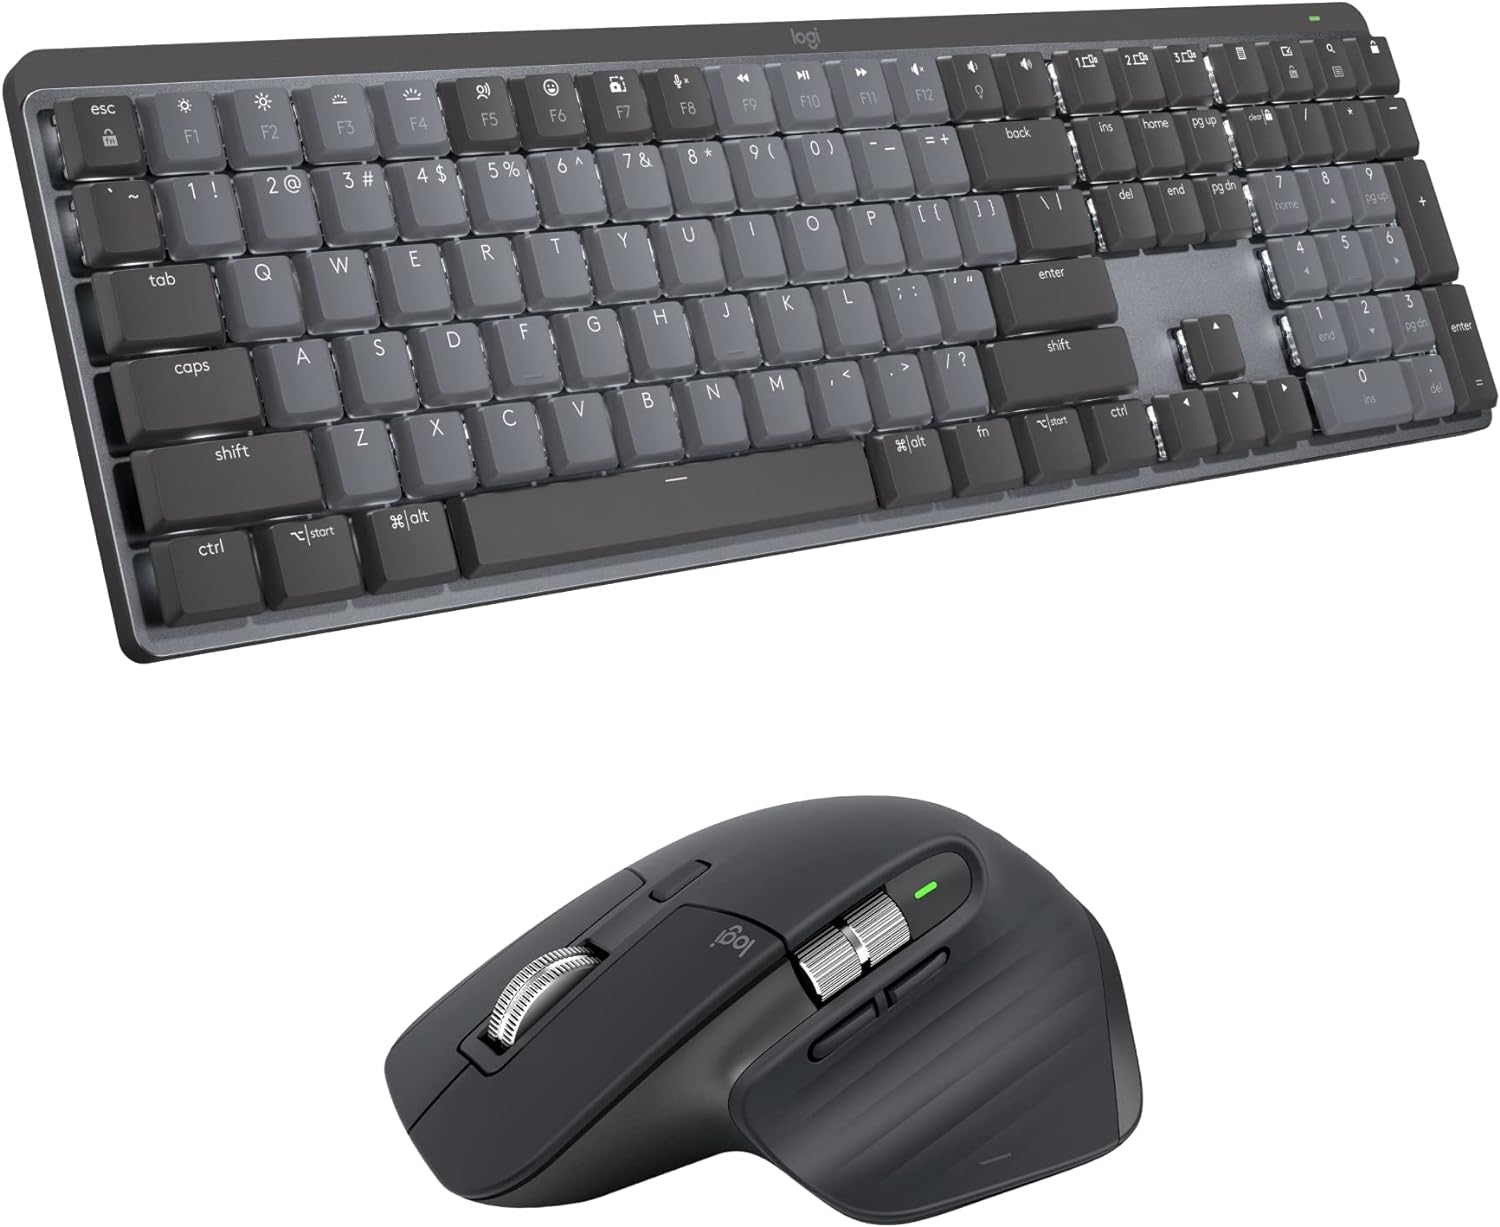 Logitech MX Mechanical Full-Size Illuminated Wireless Keyboard, Clicky, and MX Master 3S Performance Wireless Bluetooth Mouse Bundle, macOS, Windows, Linux, iOS, Android